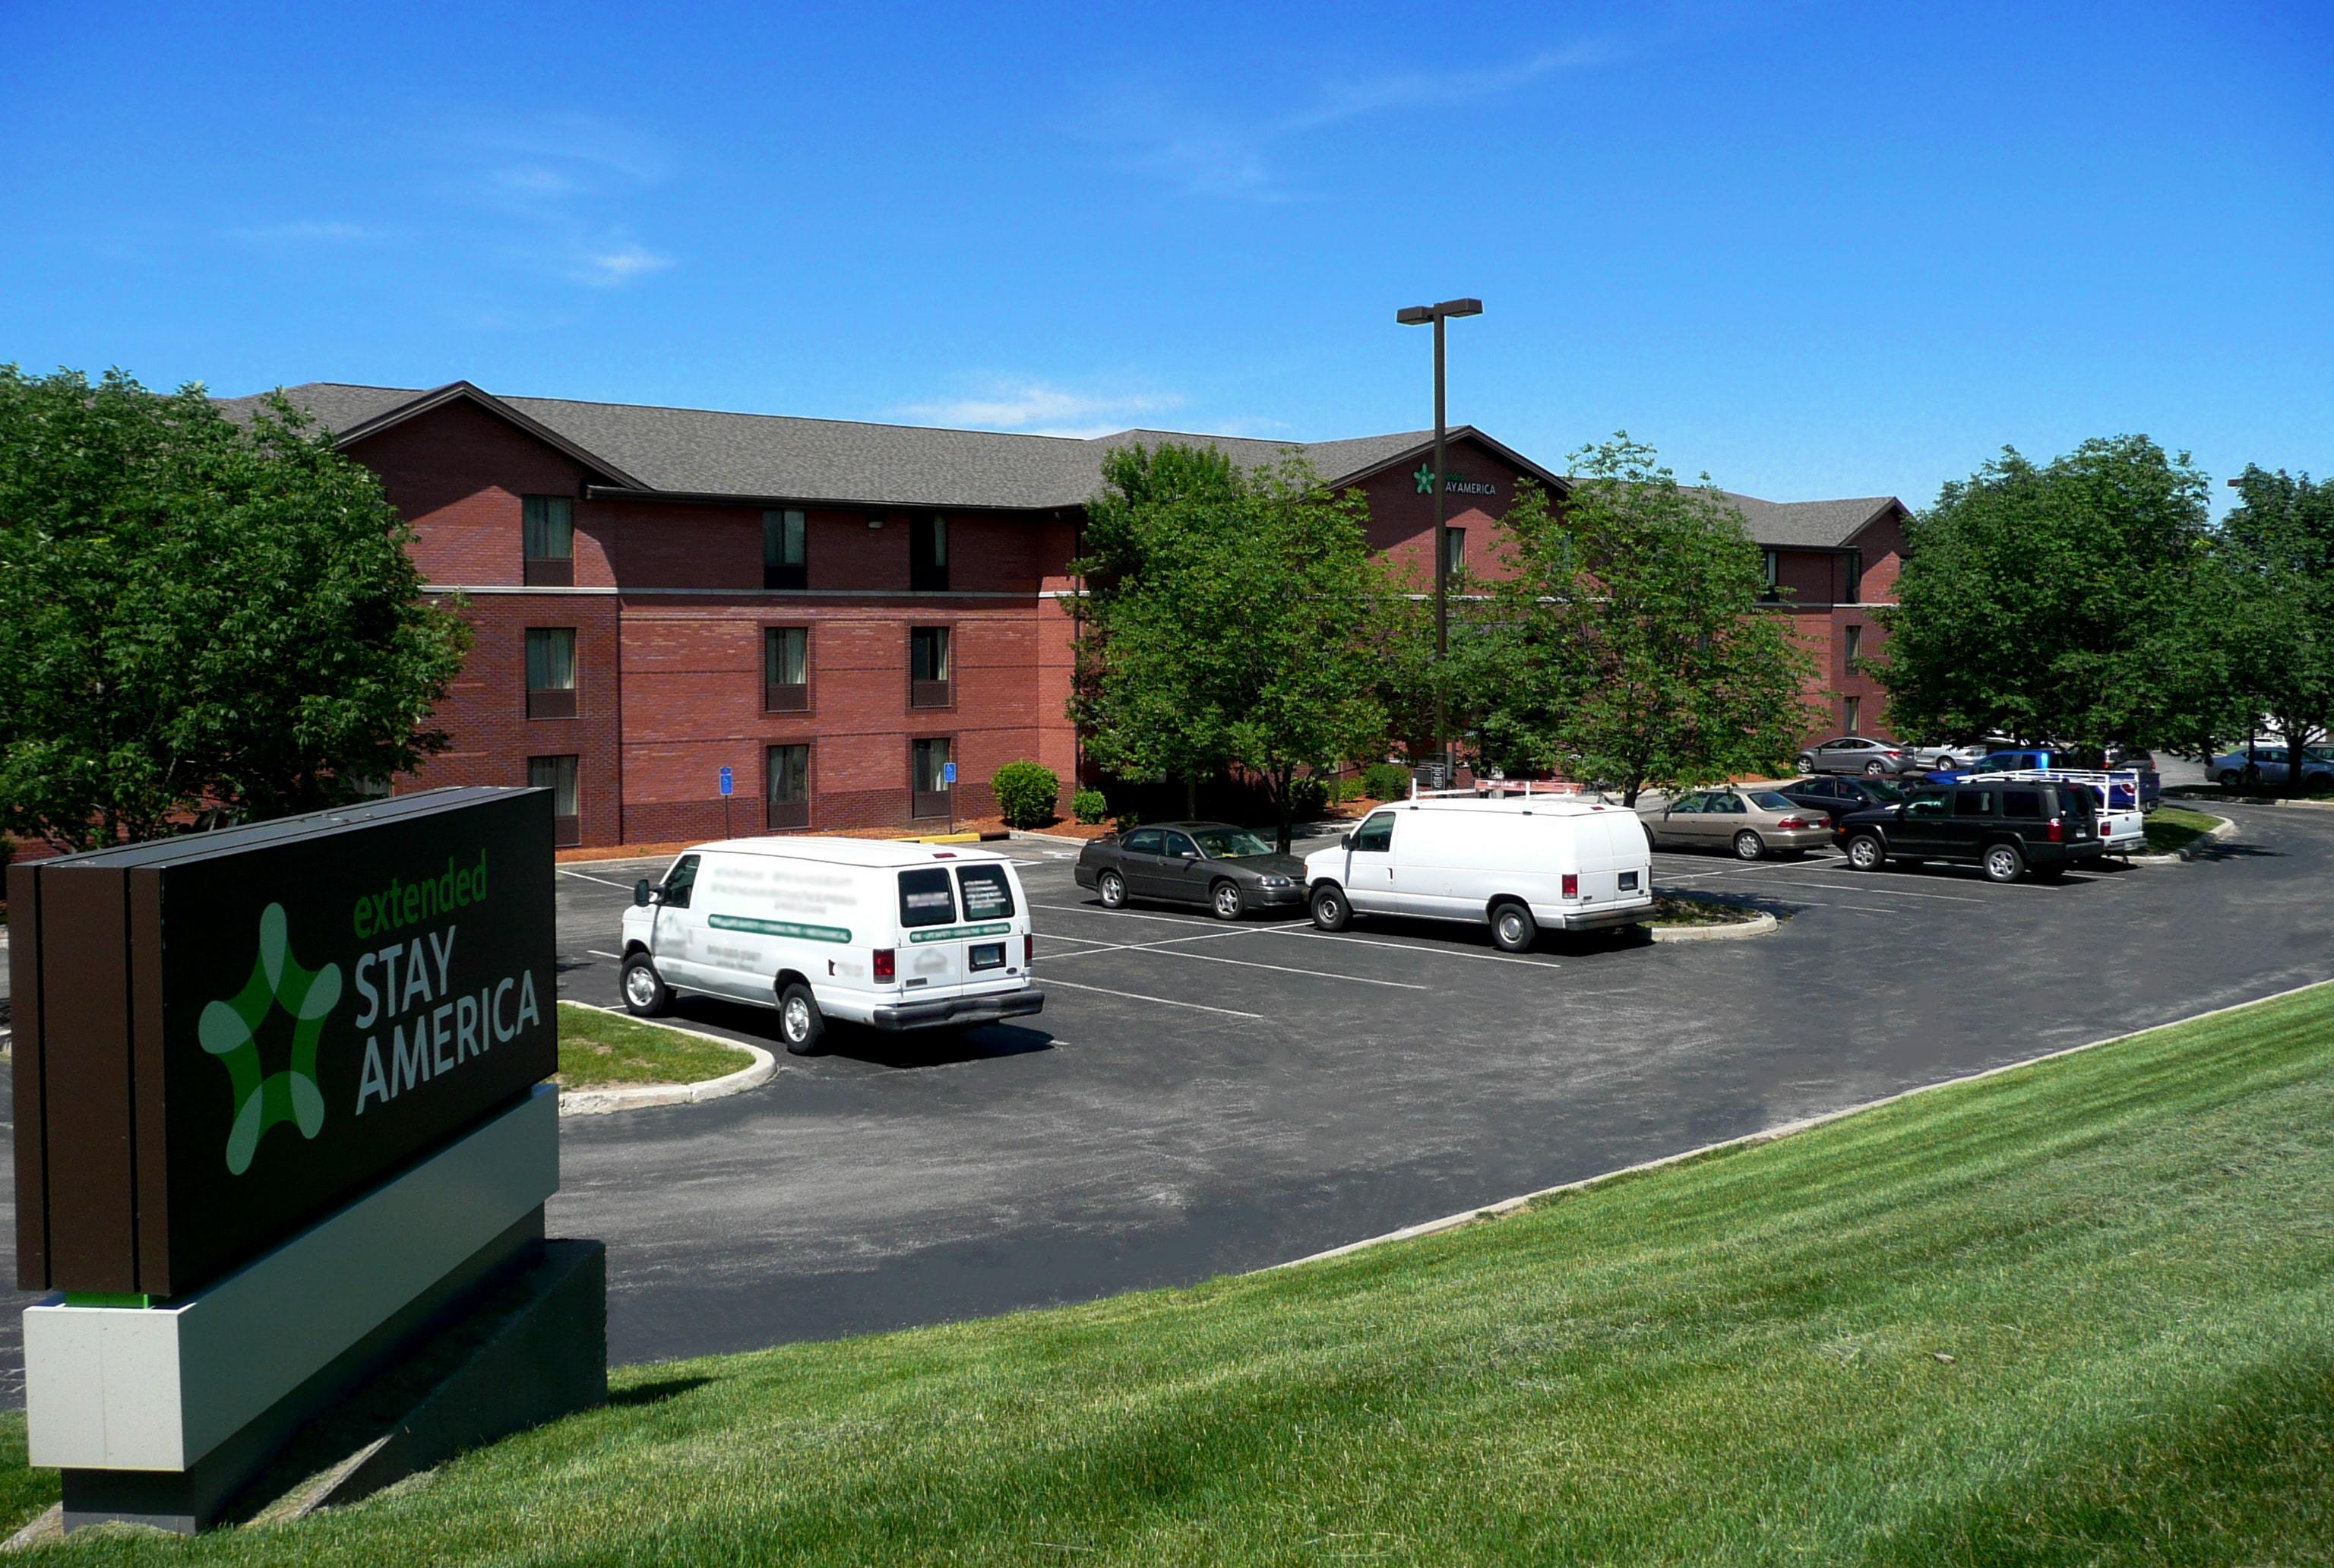 Photo of Extended Stay America - Des Moines - West Des Moines, West Des Moines, IA